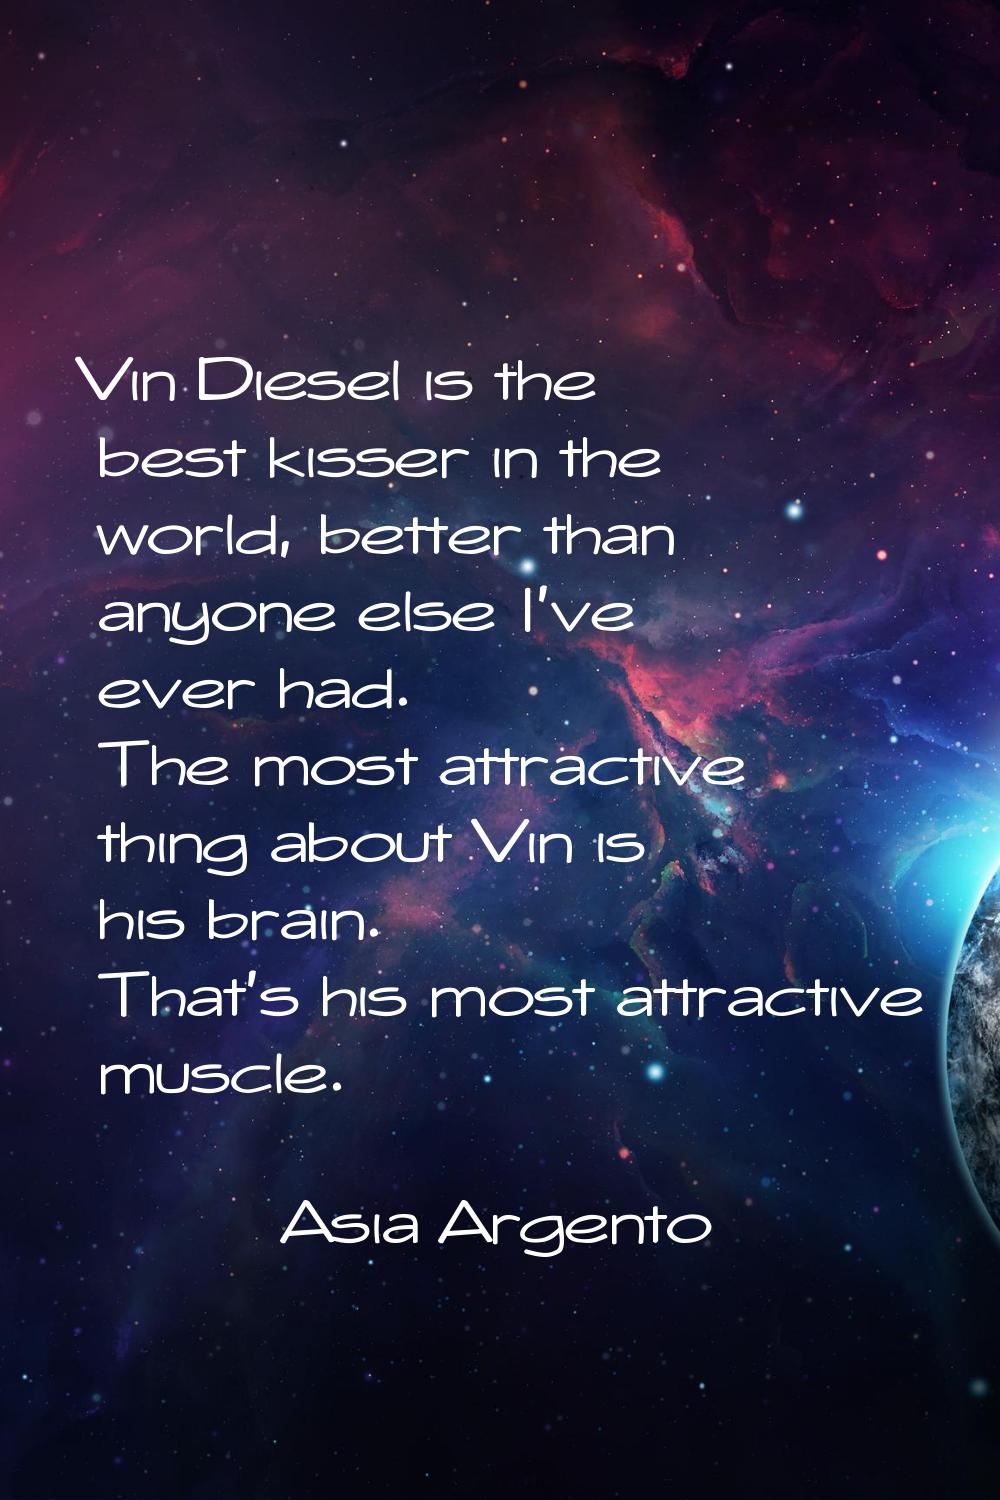 Vin Diesel is the best kisser in the world, better than anyone else I've ever had. The most attract